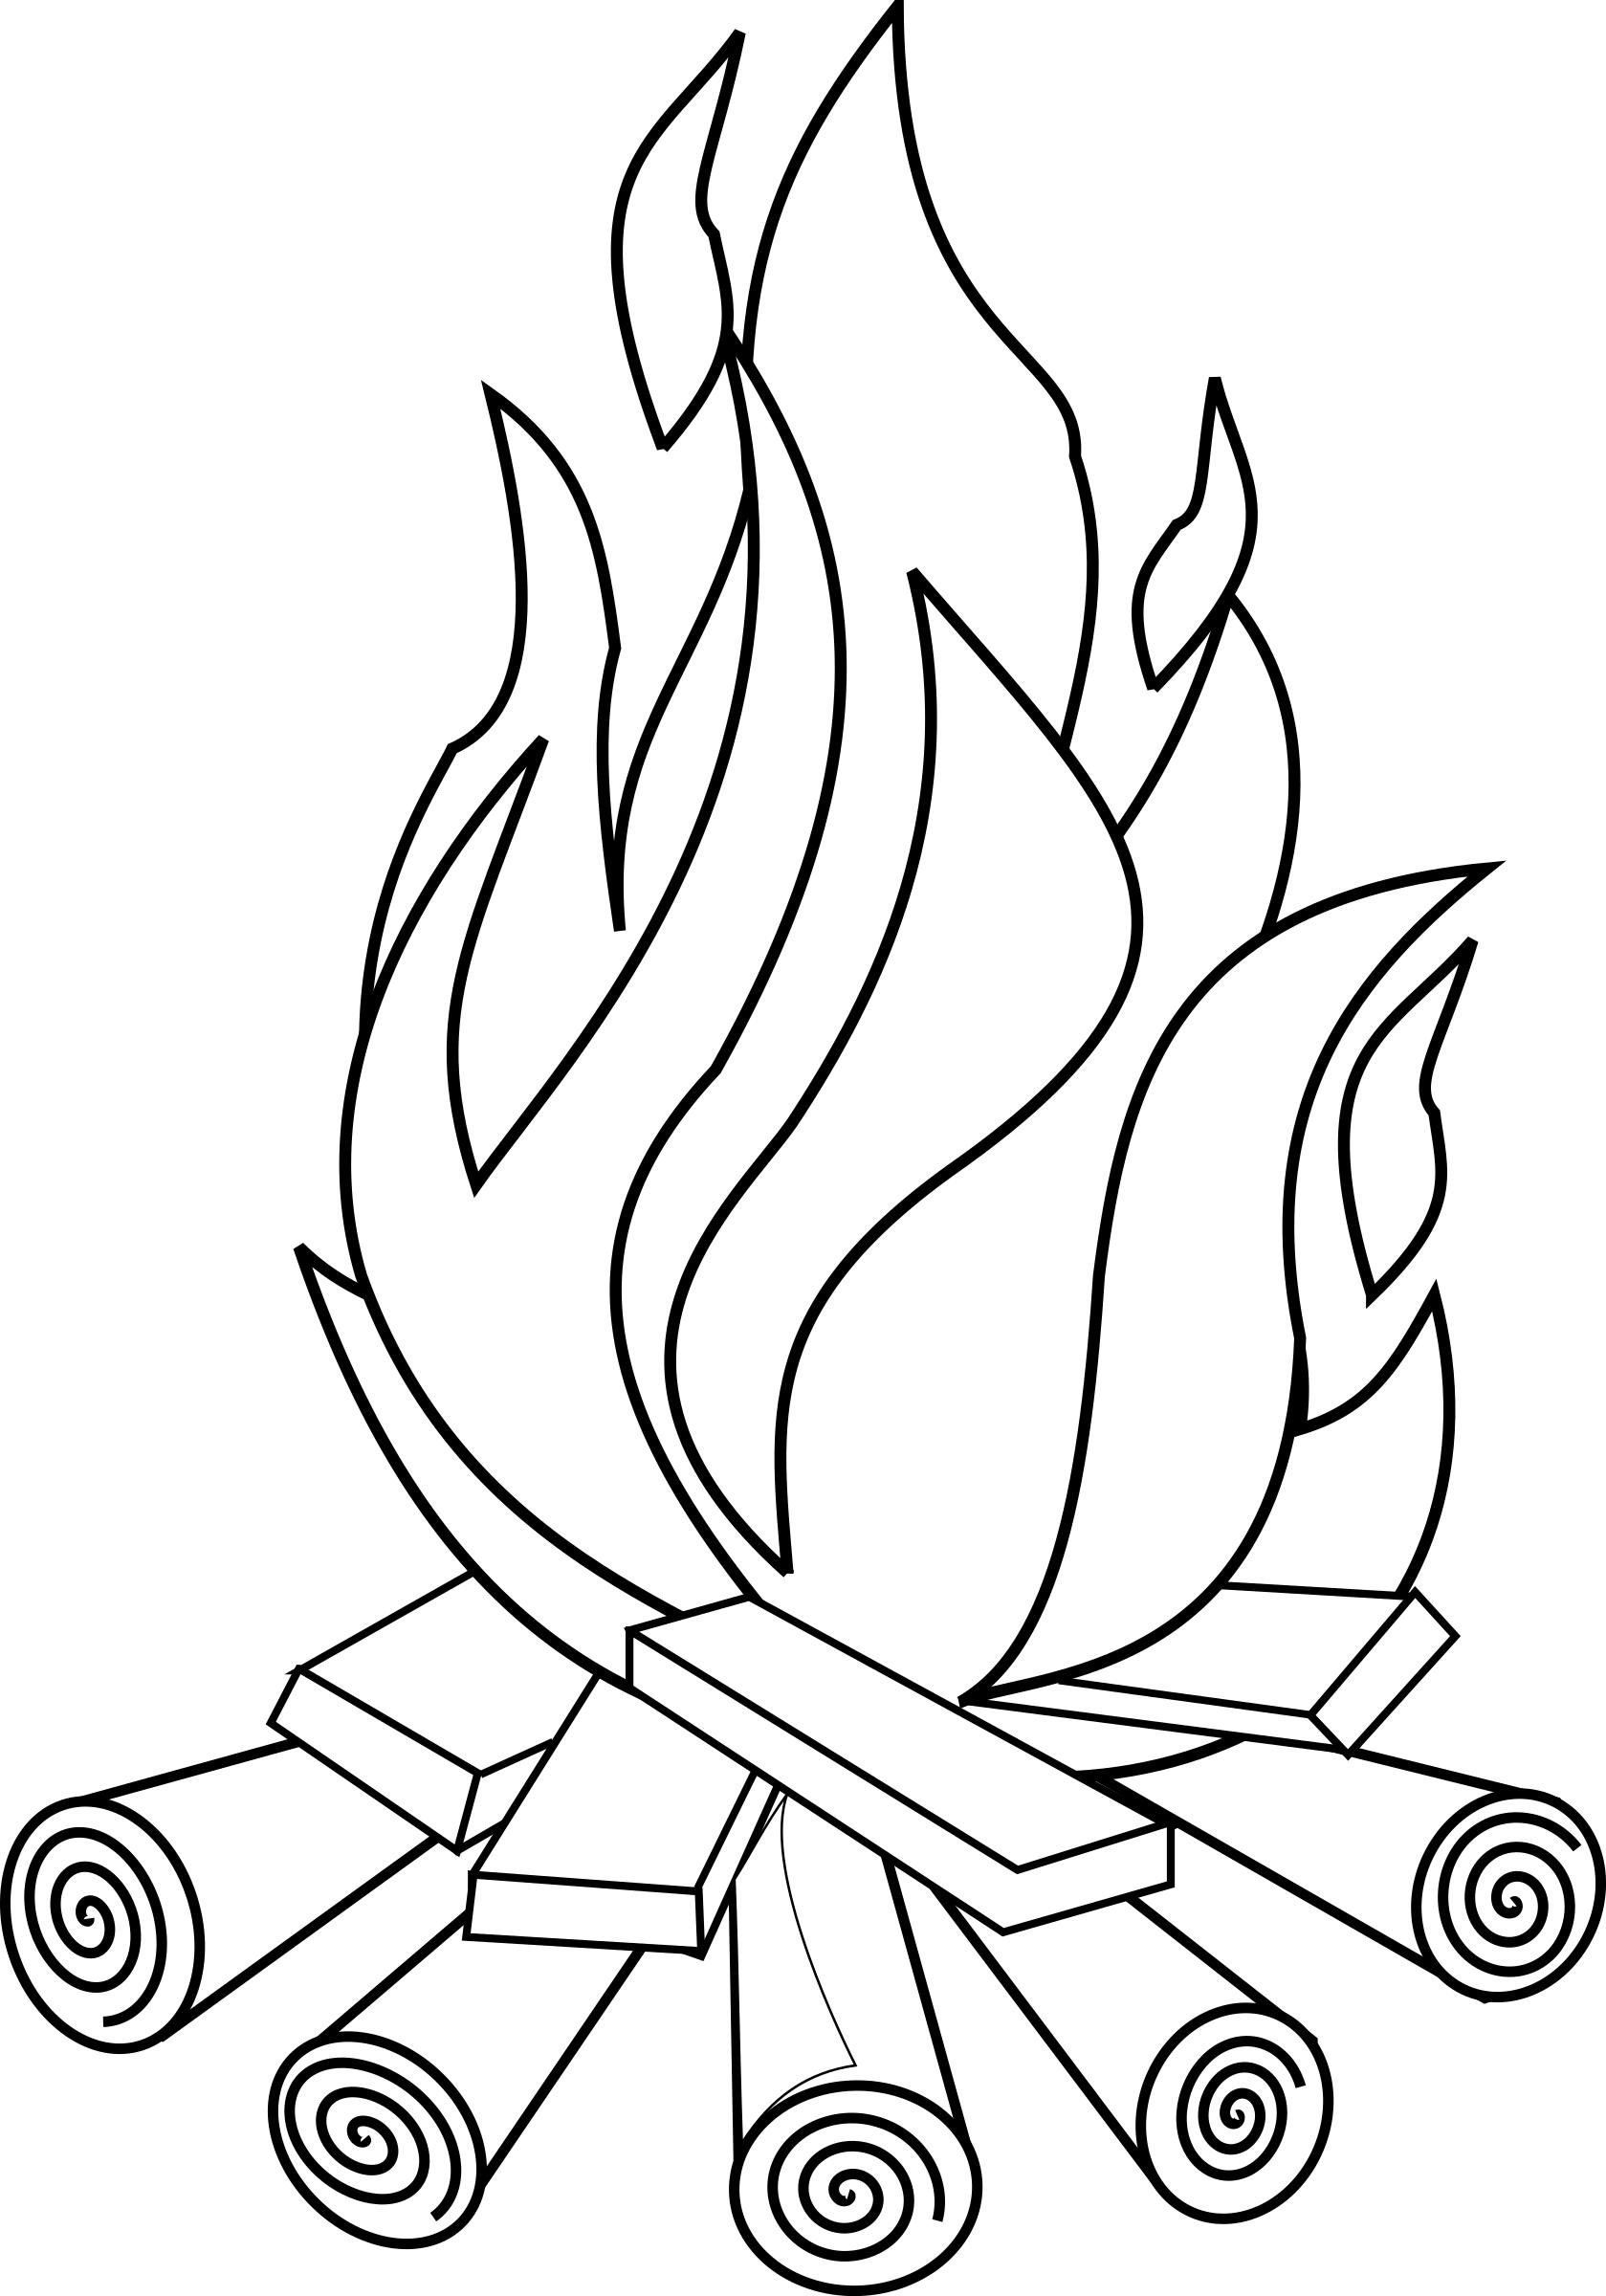 Fire Line Art icons